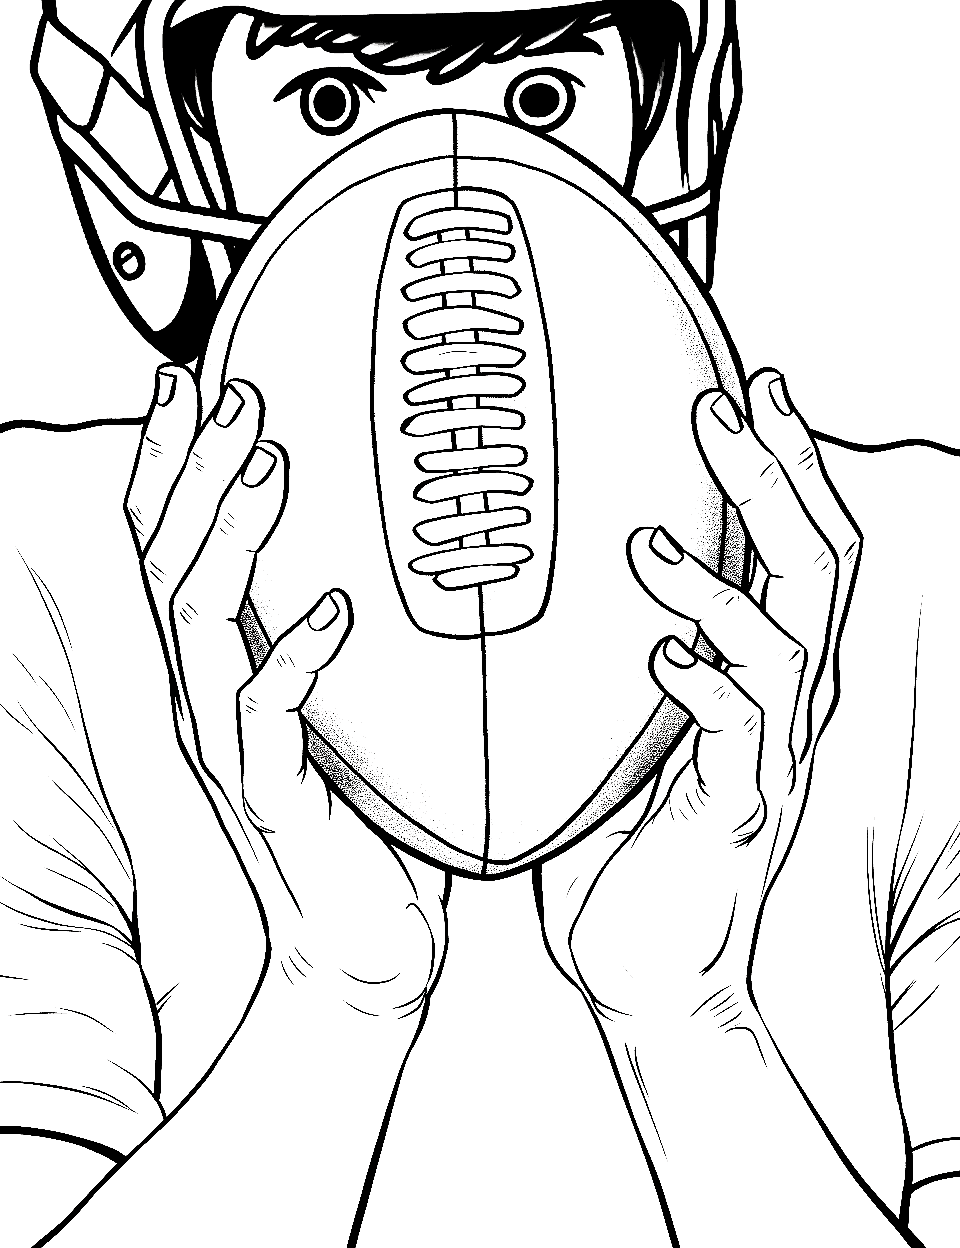 Gripping the Football Coloring Page - A close-up of hands gripping a football tightly.